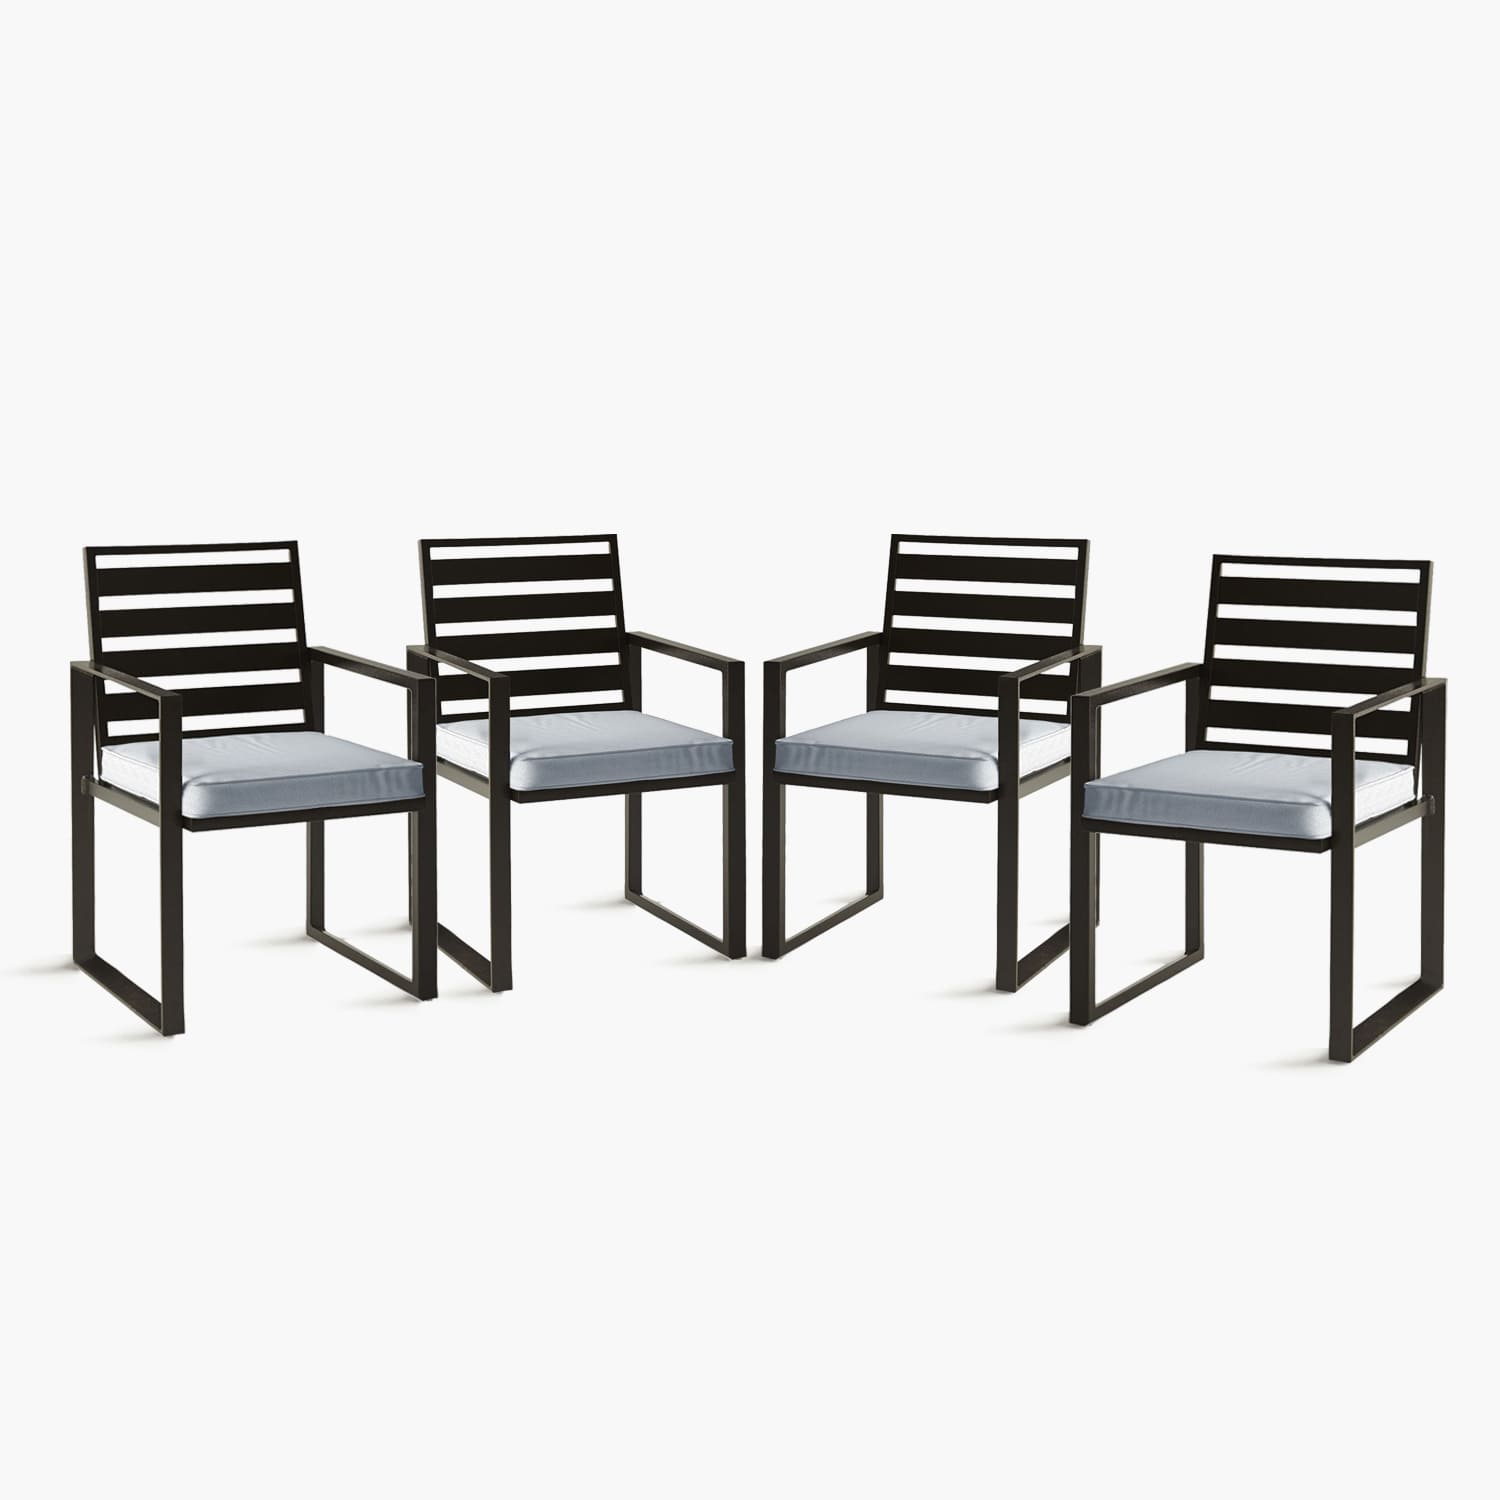 patio dining chairoutdoor dining chair, patio metal chairs. outdoor dining outdoor dinner, set of 4